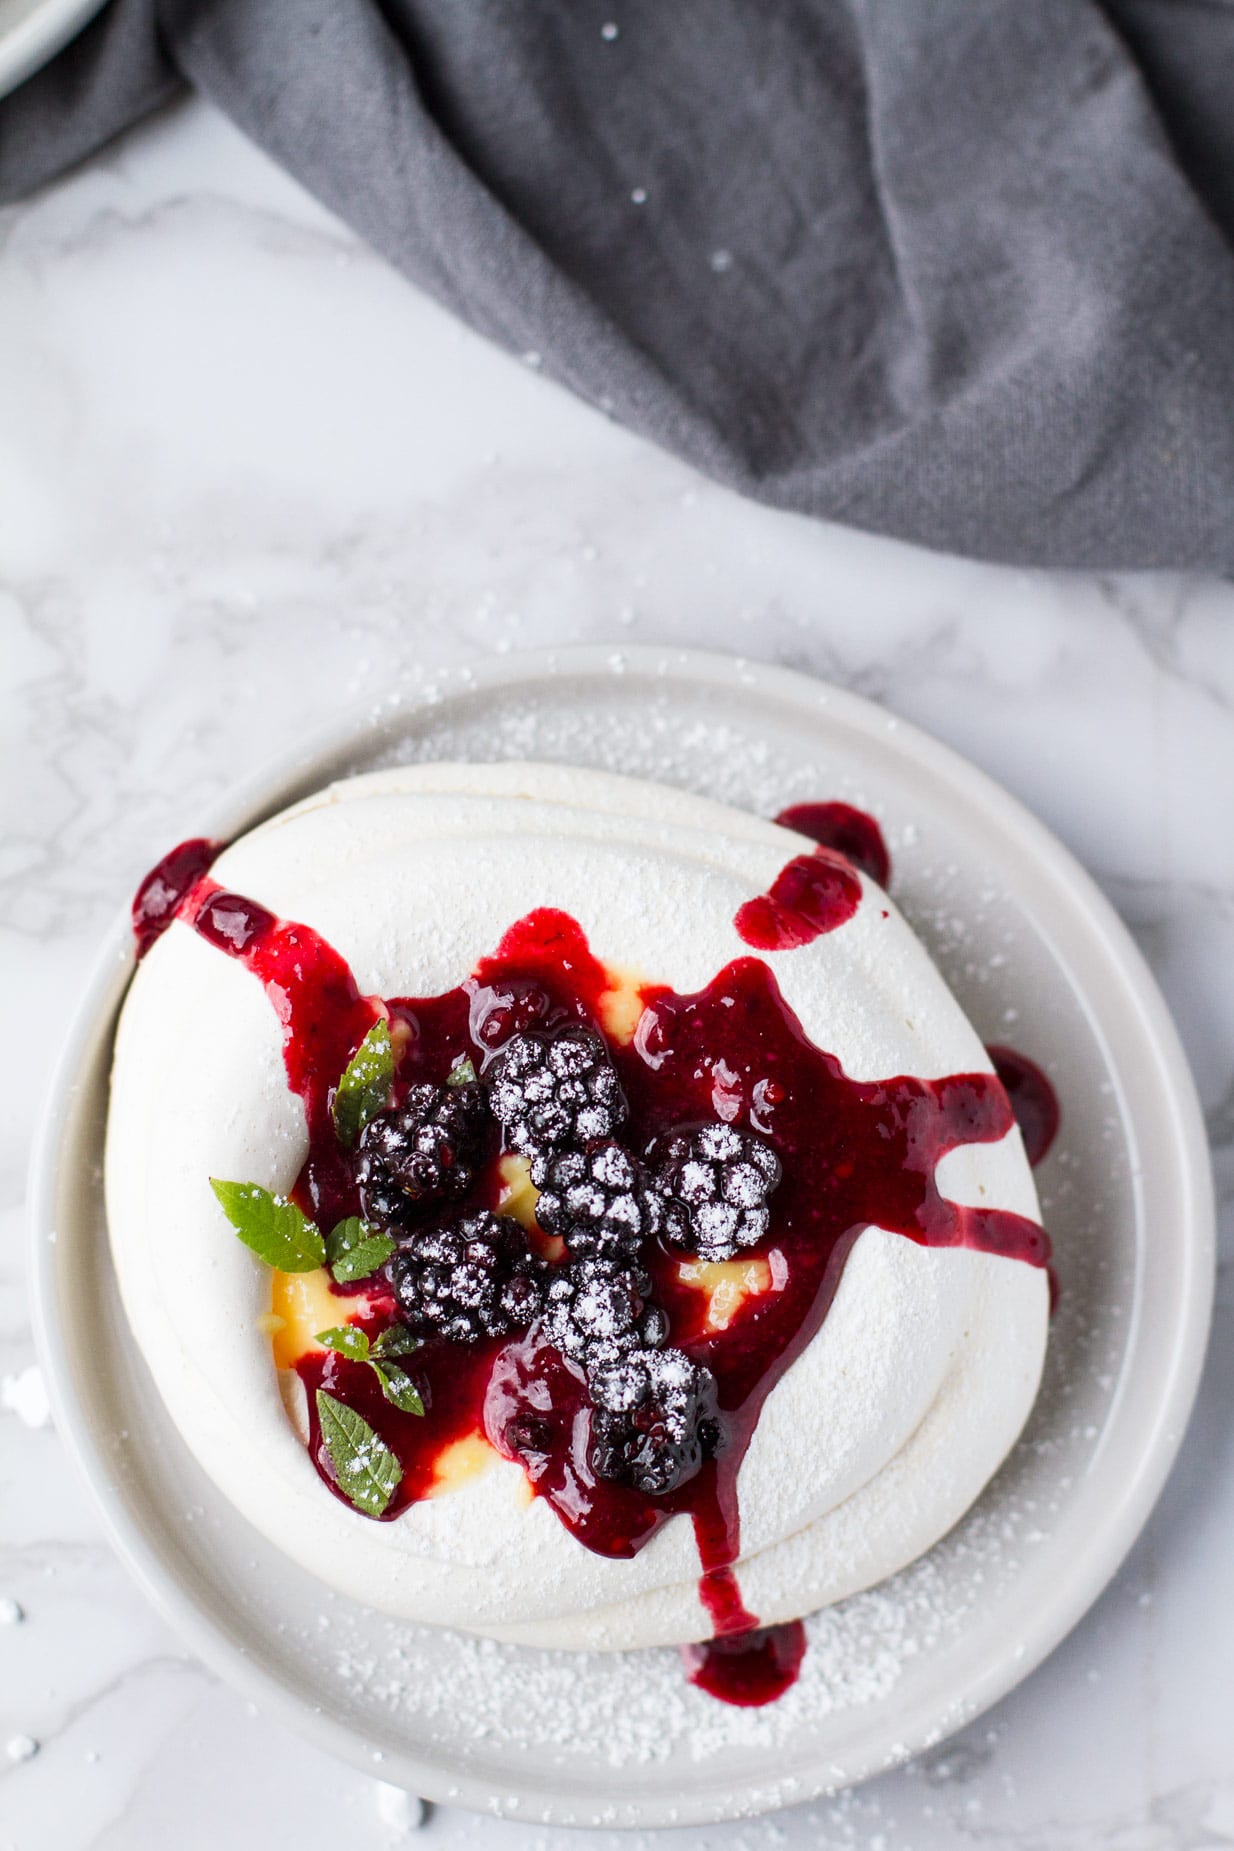 One pavlova nest with fresh blackberries and blackberry syrup running down the sides. Flatlay.